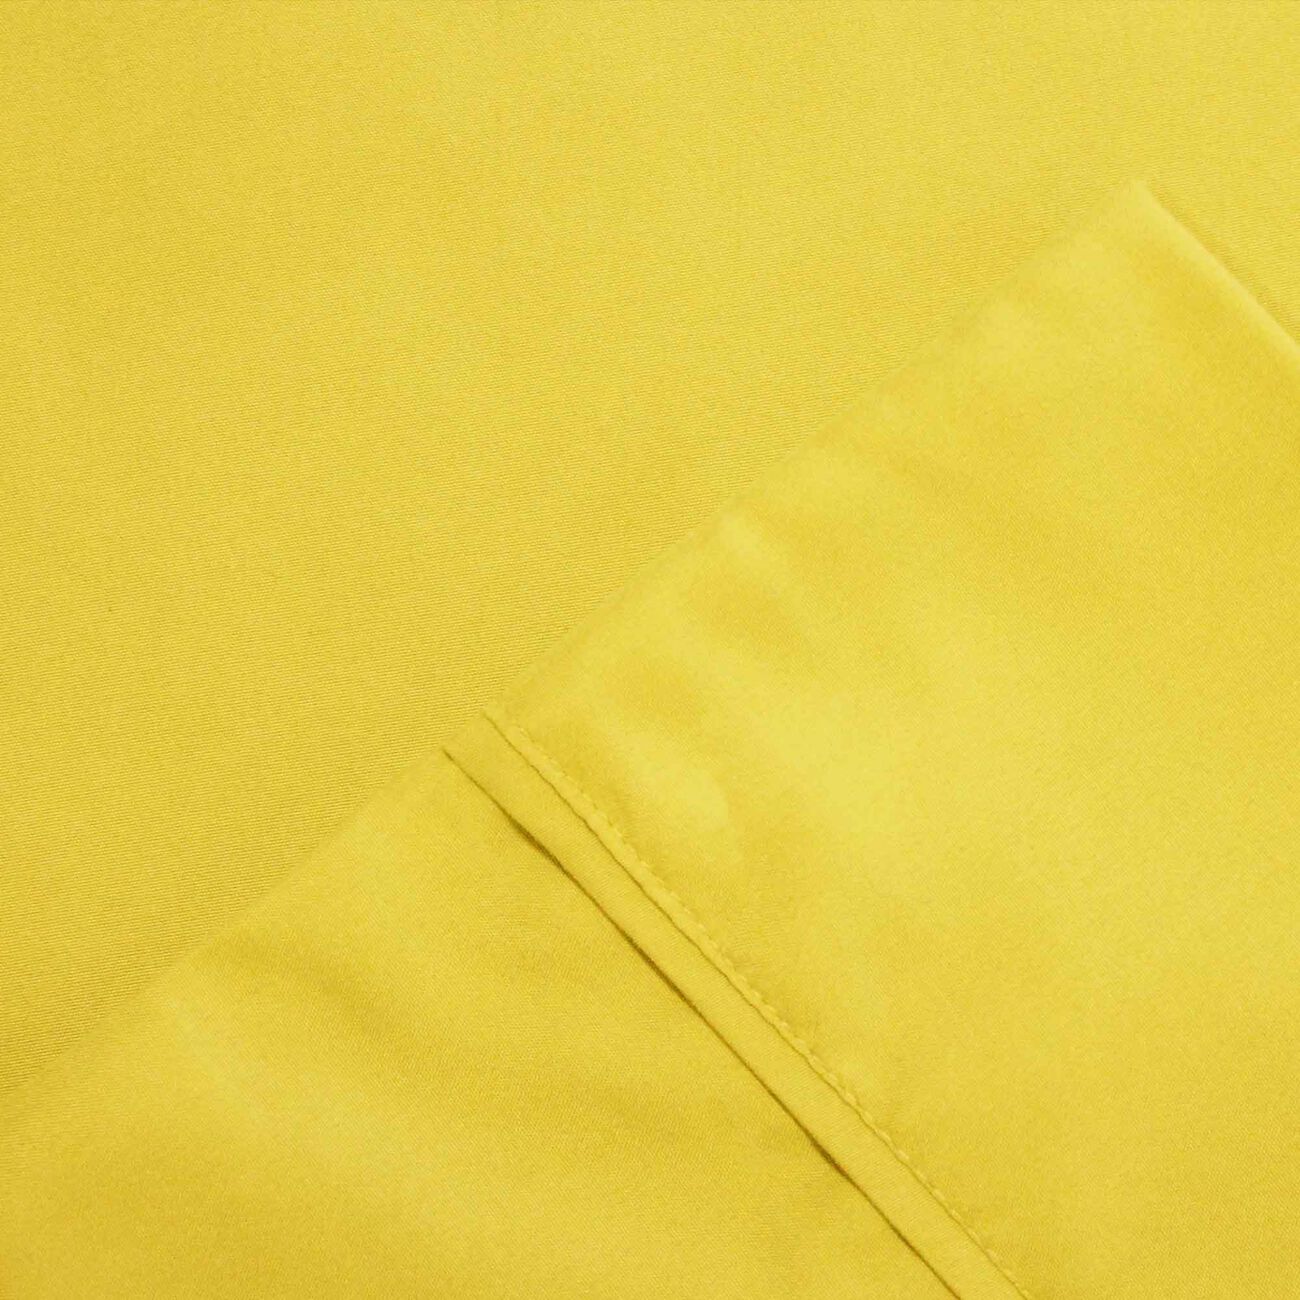 Bezons 4 Piece California King Microfiber Sheet Set with 1800 Thread Count, Yellow